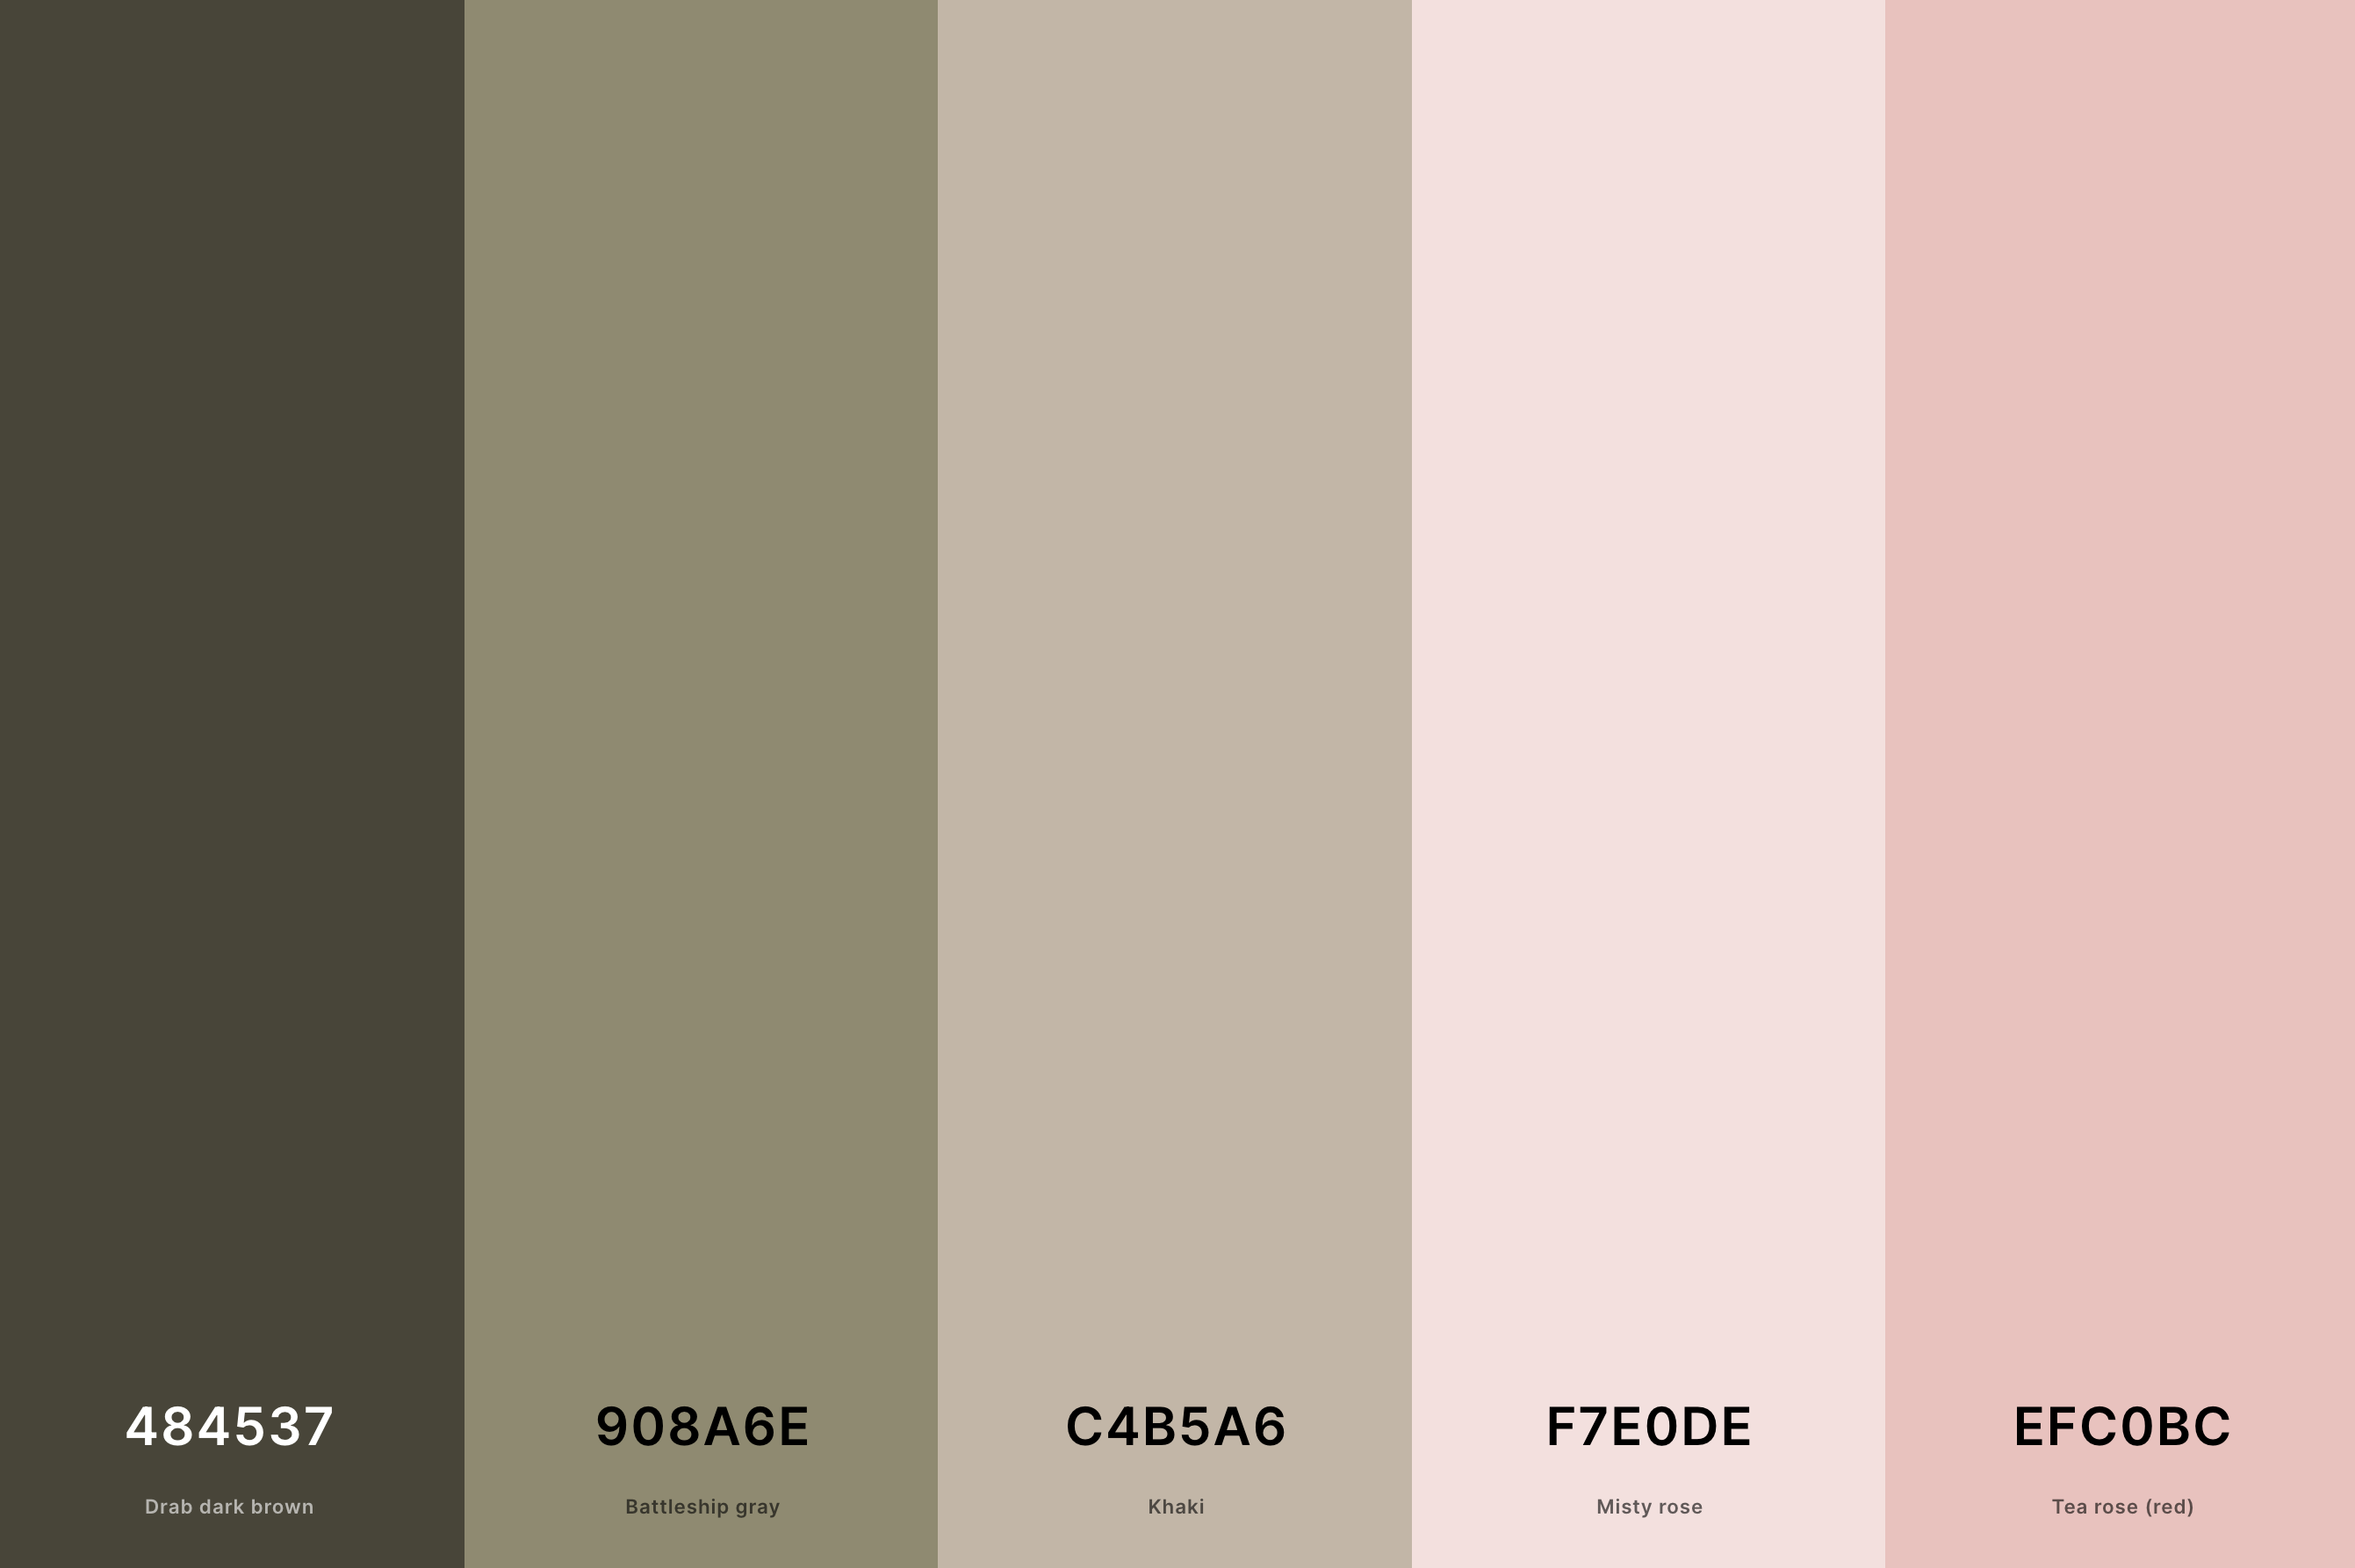 16. Sage Green And Blush Pink Color Palette Color Palette with Drab Dark Brown (Hex #484537) + Battleship Gray (Hex #908A6E) + Khaki (Hex #C4B5A6) + Misty Rose (Hex #F7E0DE) + Tea Rose (Red) (Hex #EFC0BC) Color Palette with Hex Codes